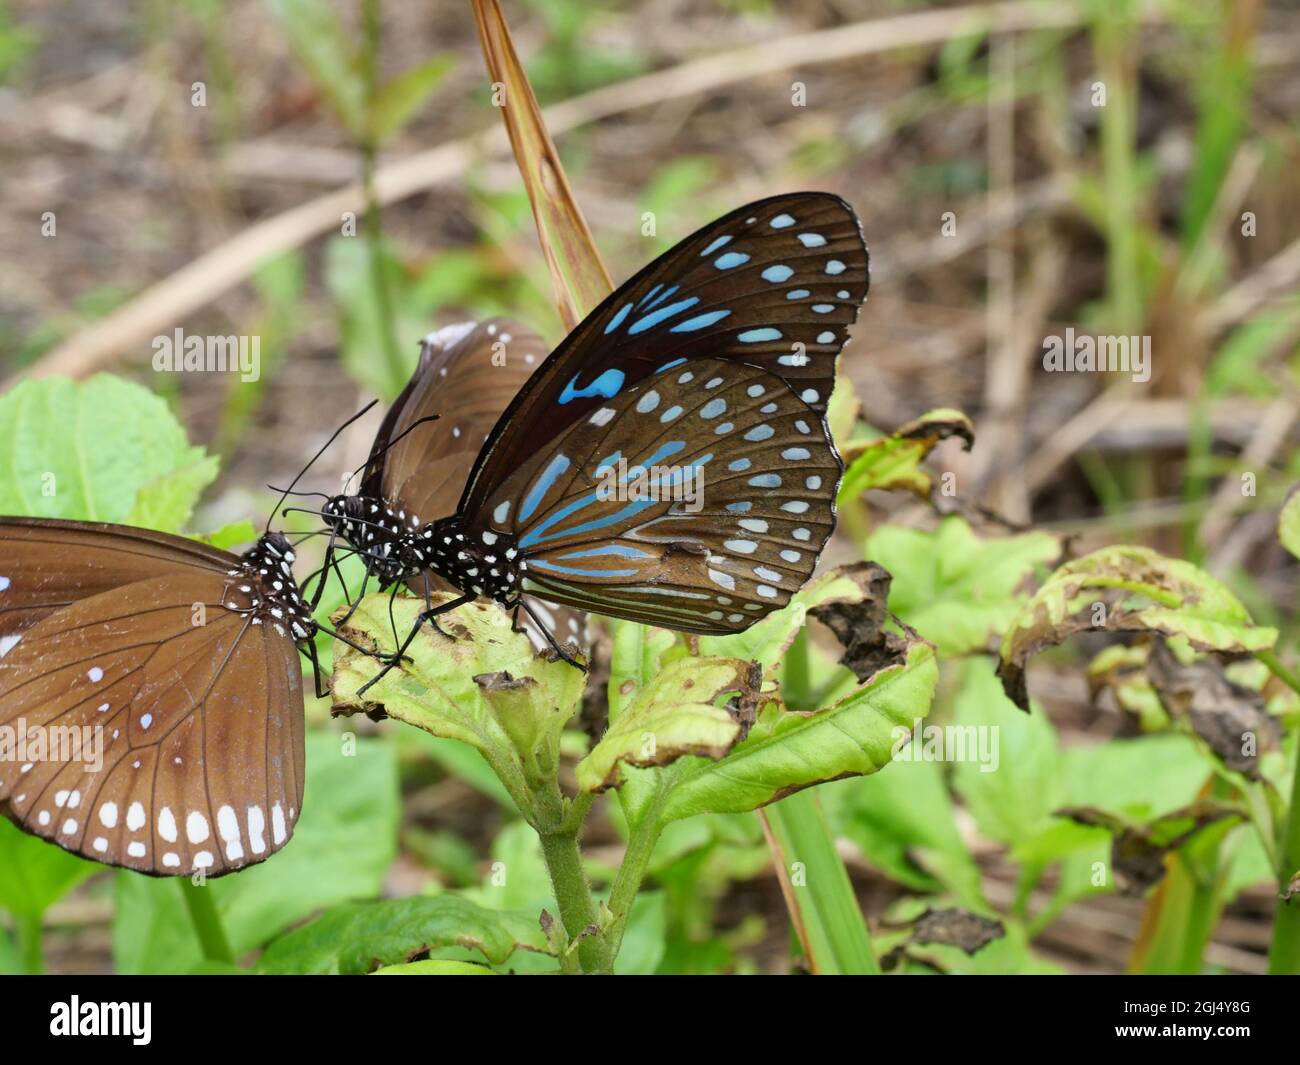 The Long-branded Blue Crow with The Pale Blue Tiger Butterfly  on green leaf of tree plant, Many white spots with brown with blue and black striped Stock Photo